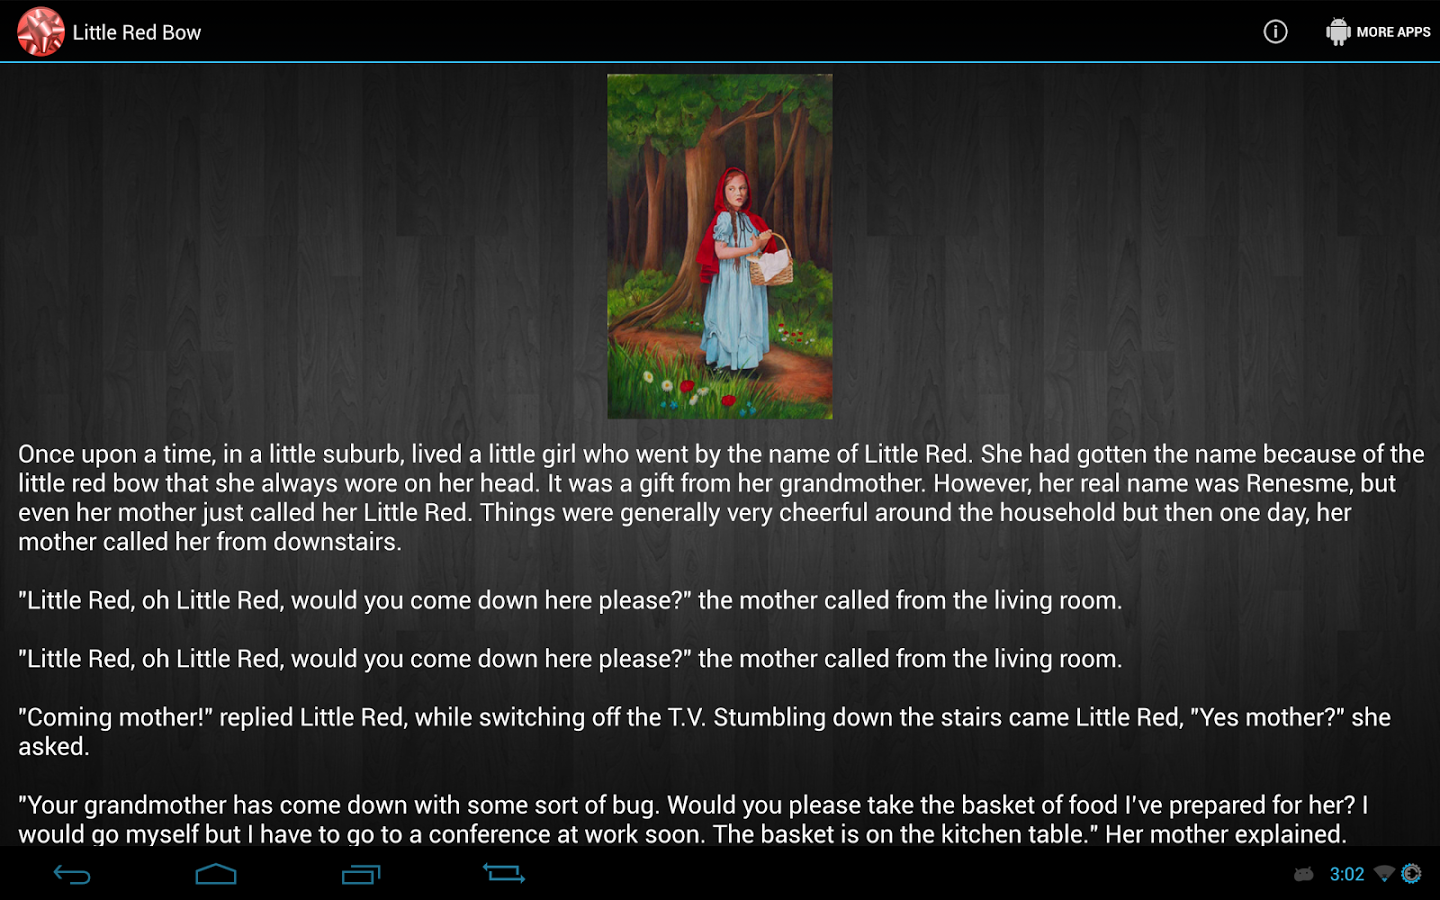 Little Red Bow-Red Riding Hood 2.0